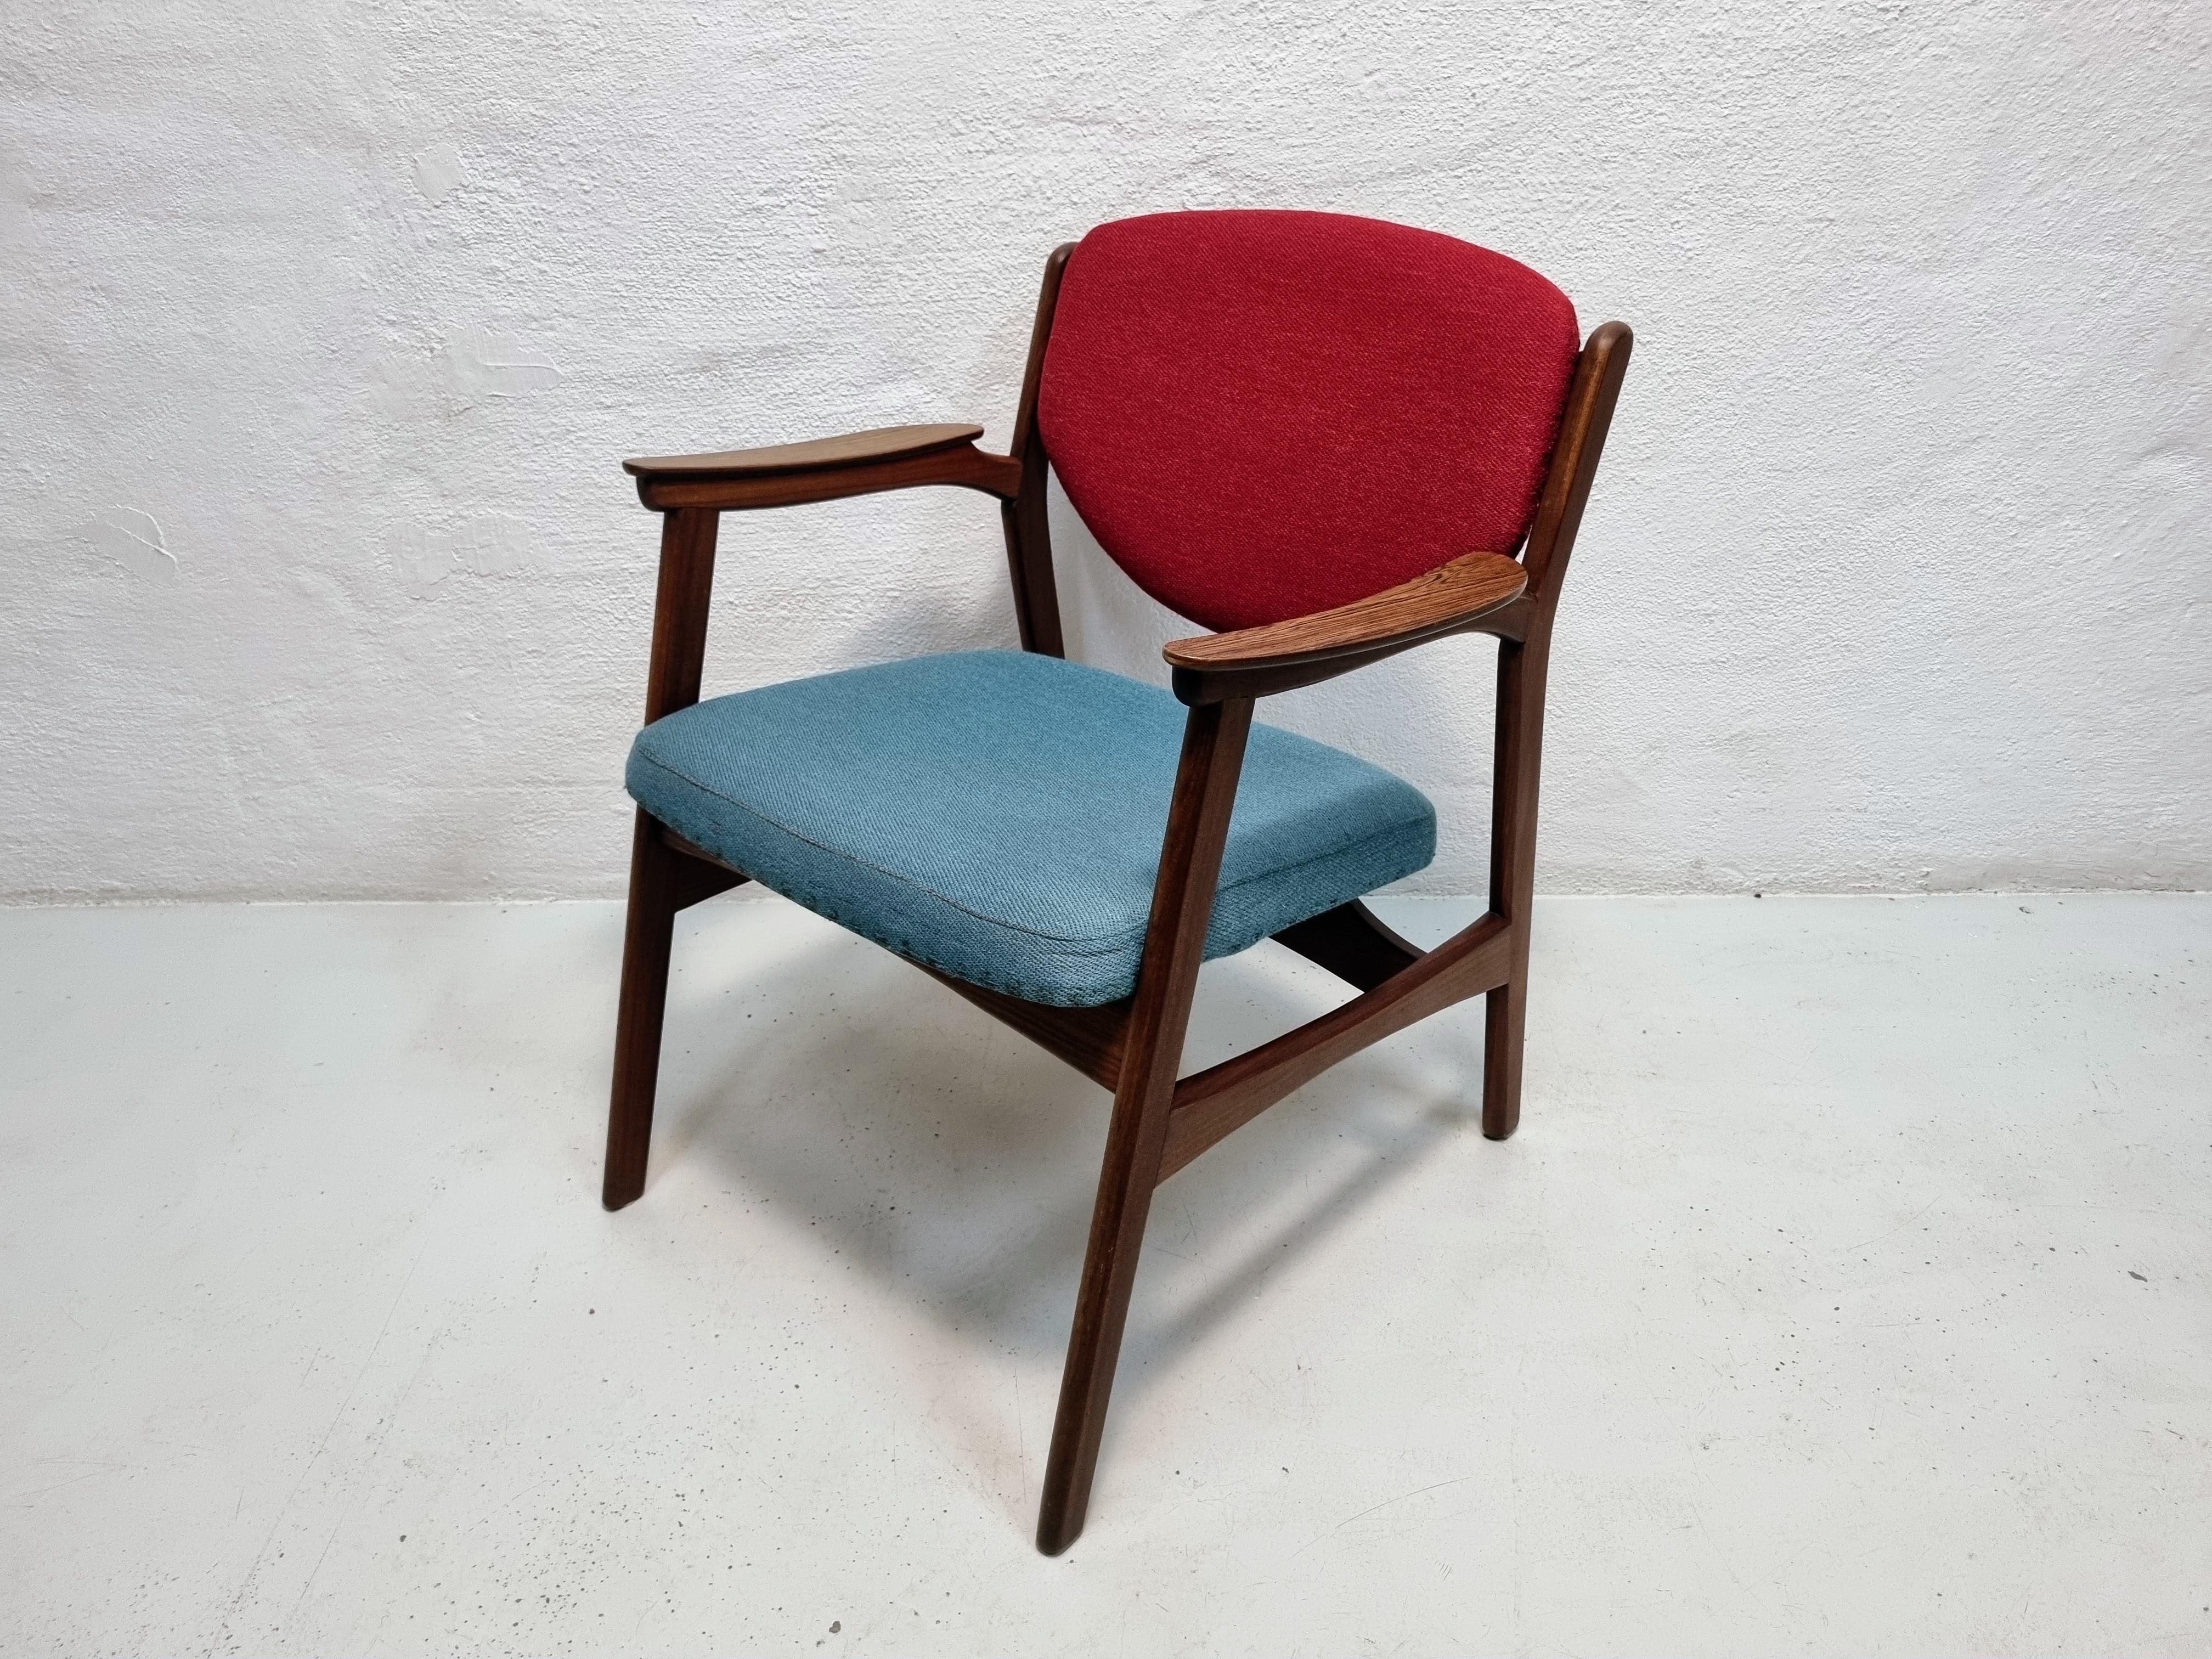 Rare armchair with solid teak frame and rosewood armrests, upholstered in blue and red upholstery fabric.
The chair is attributed to the Norwegian designers Rolf Rastad and Adolf Relling.